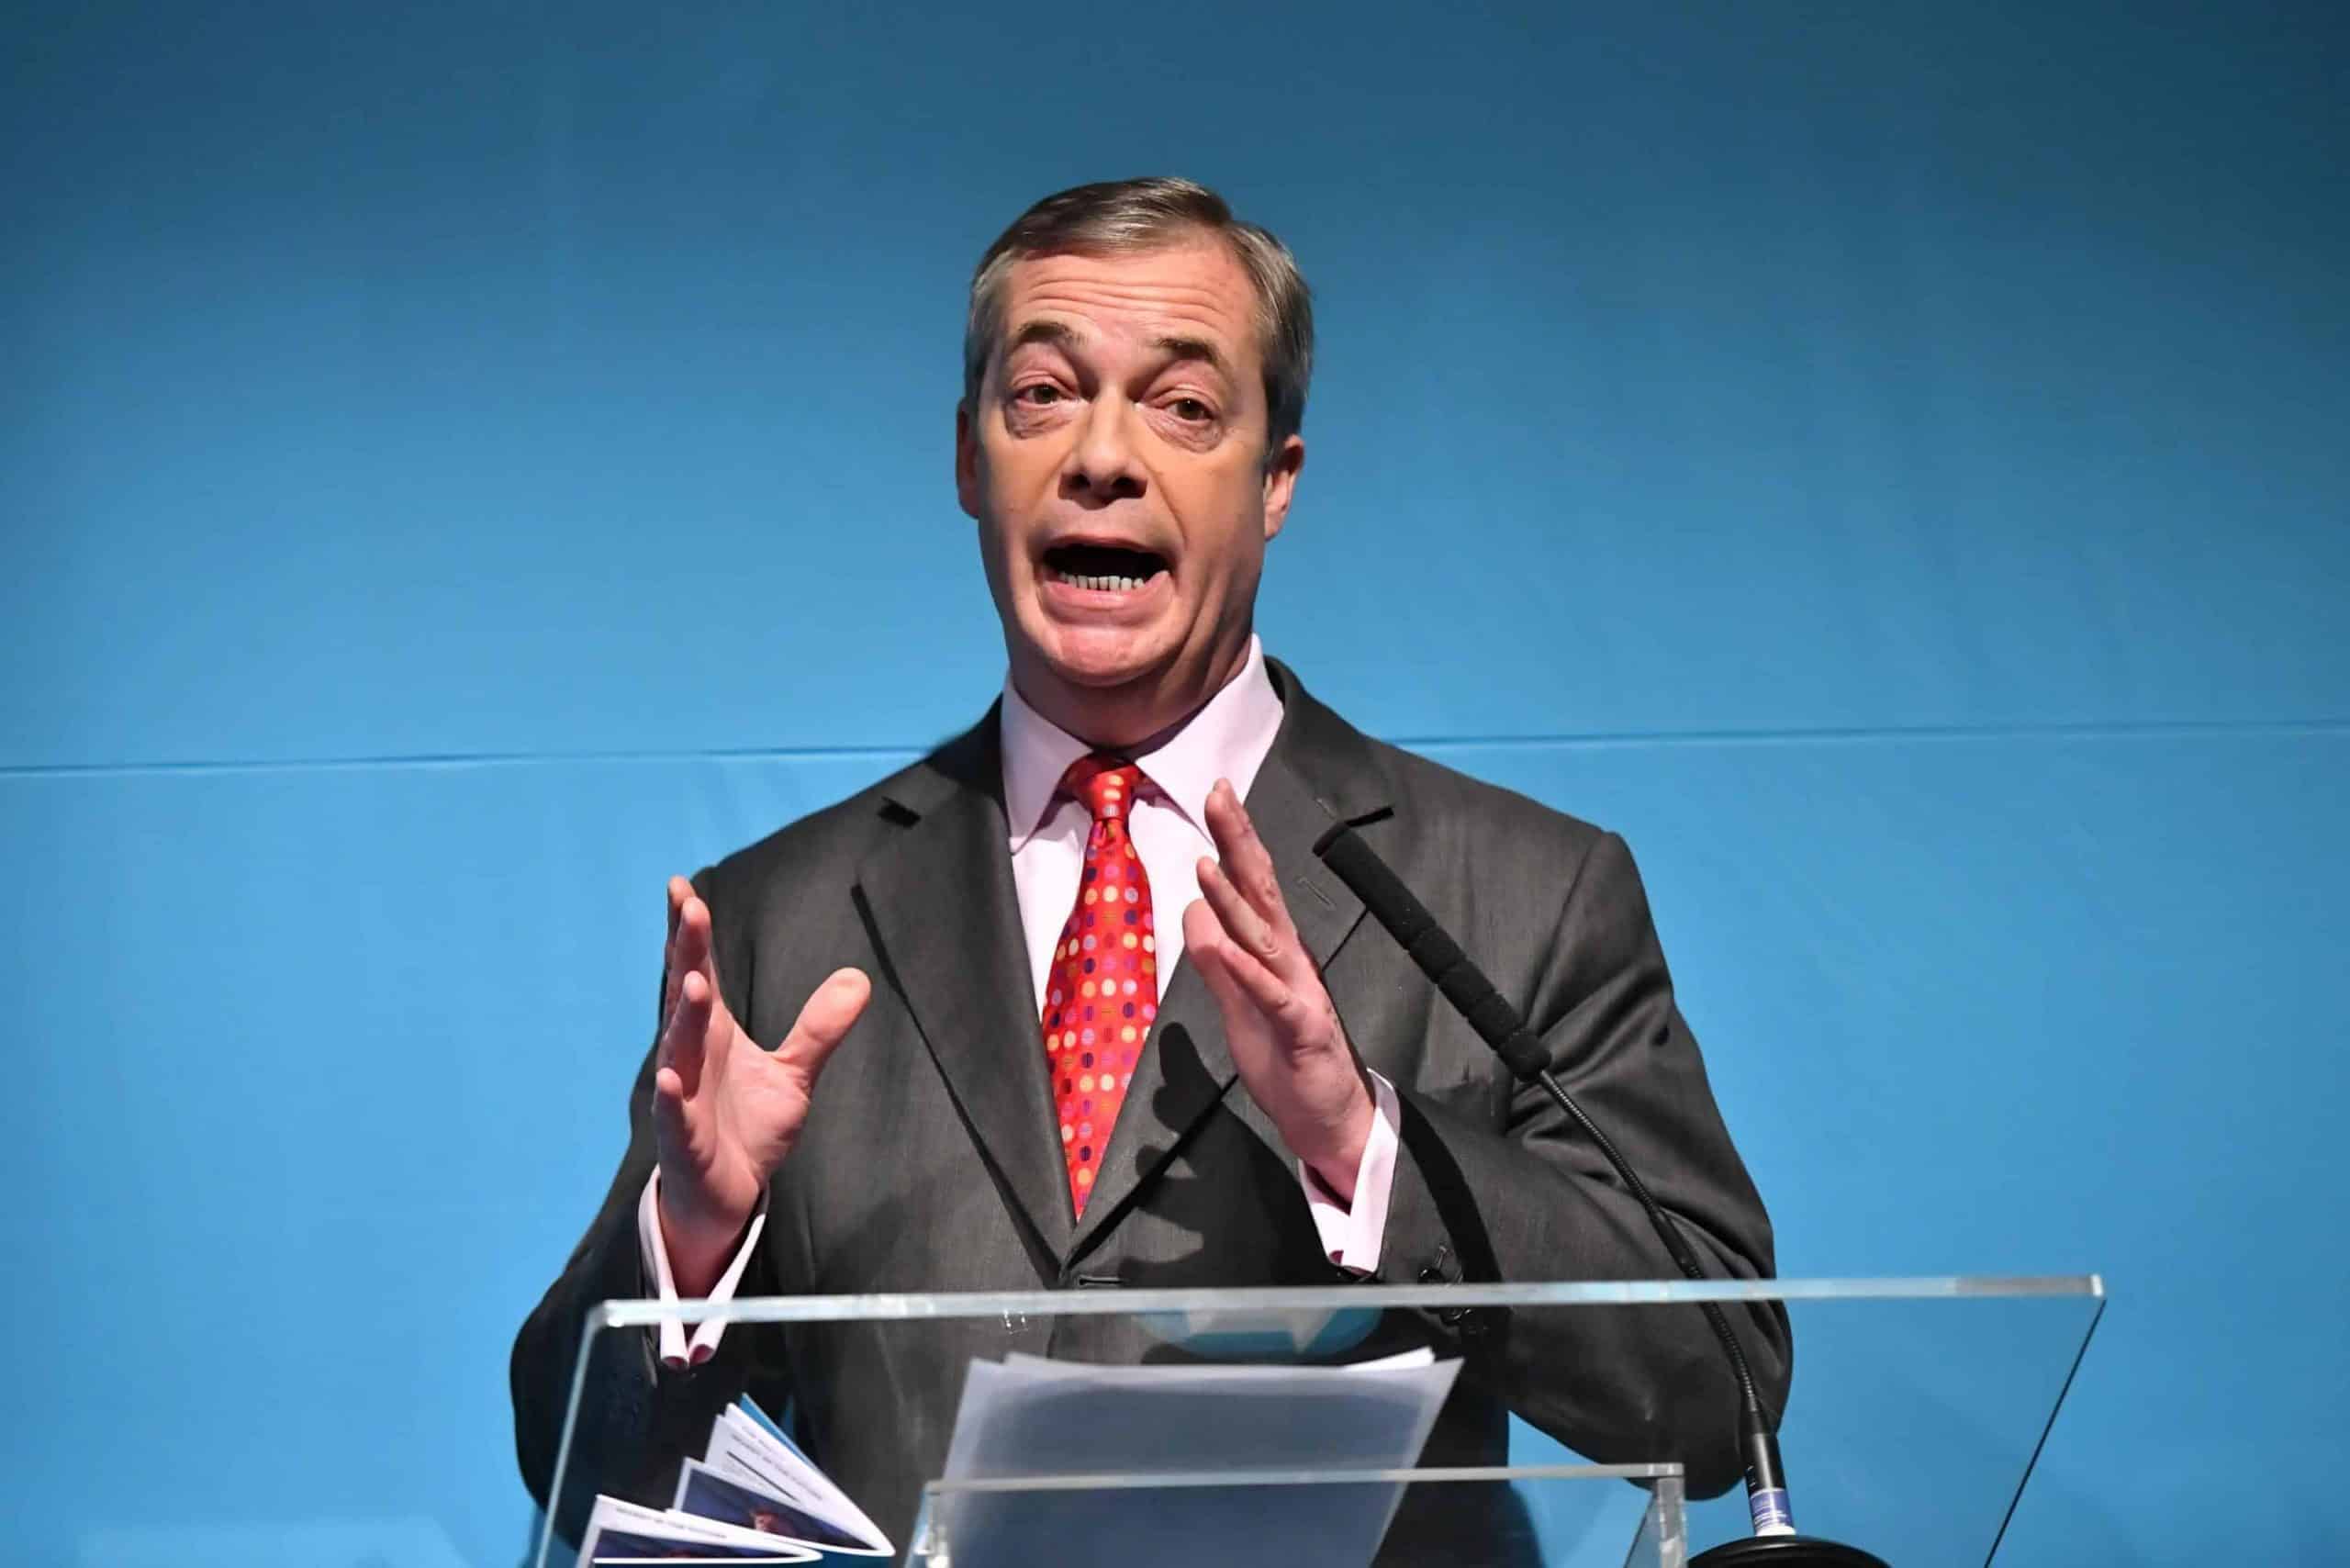 Nigel Farage criticised for likening Black Lives Matter protests to the Taliban